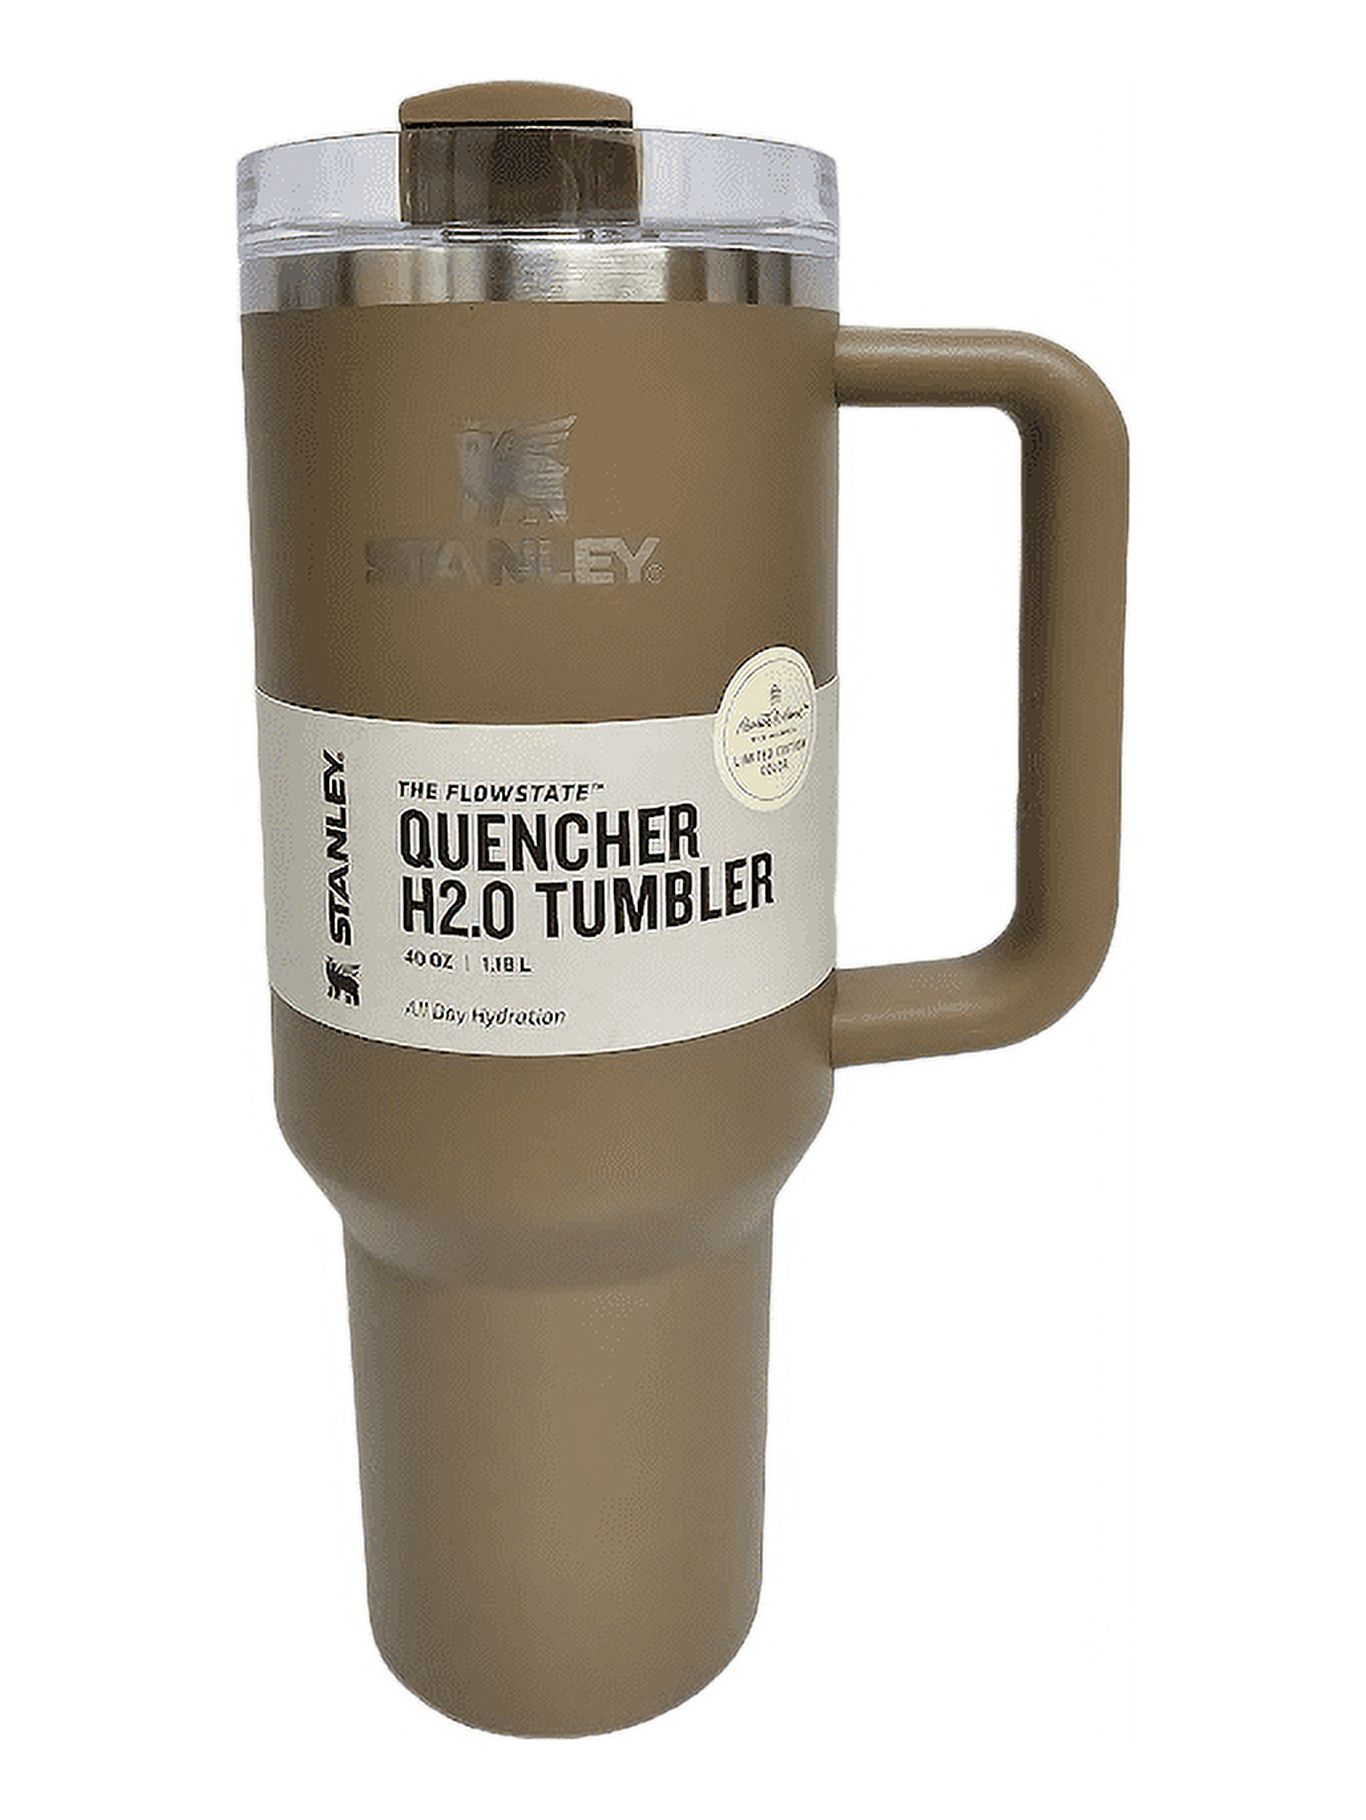 Hearth　with　Stainless　Magnolia　Steel　Brown　Hand™　40oz　Flowstate　Quencher　Tumbler　Basic　Stanley　H2.0